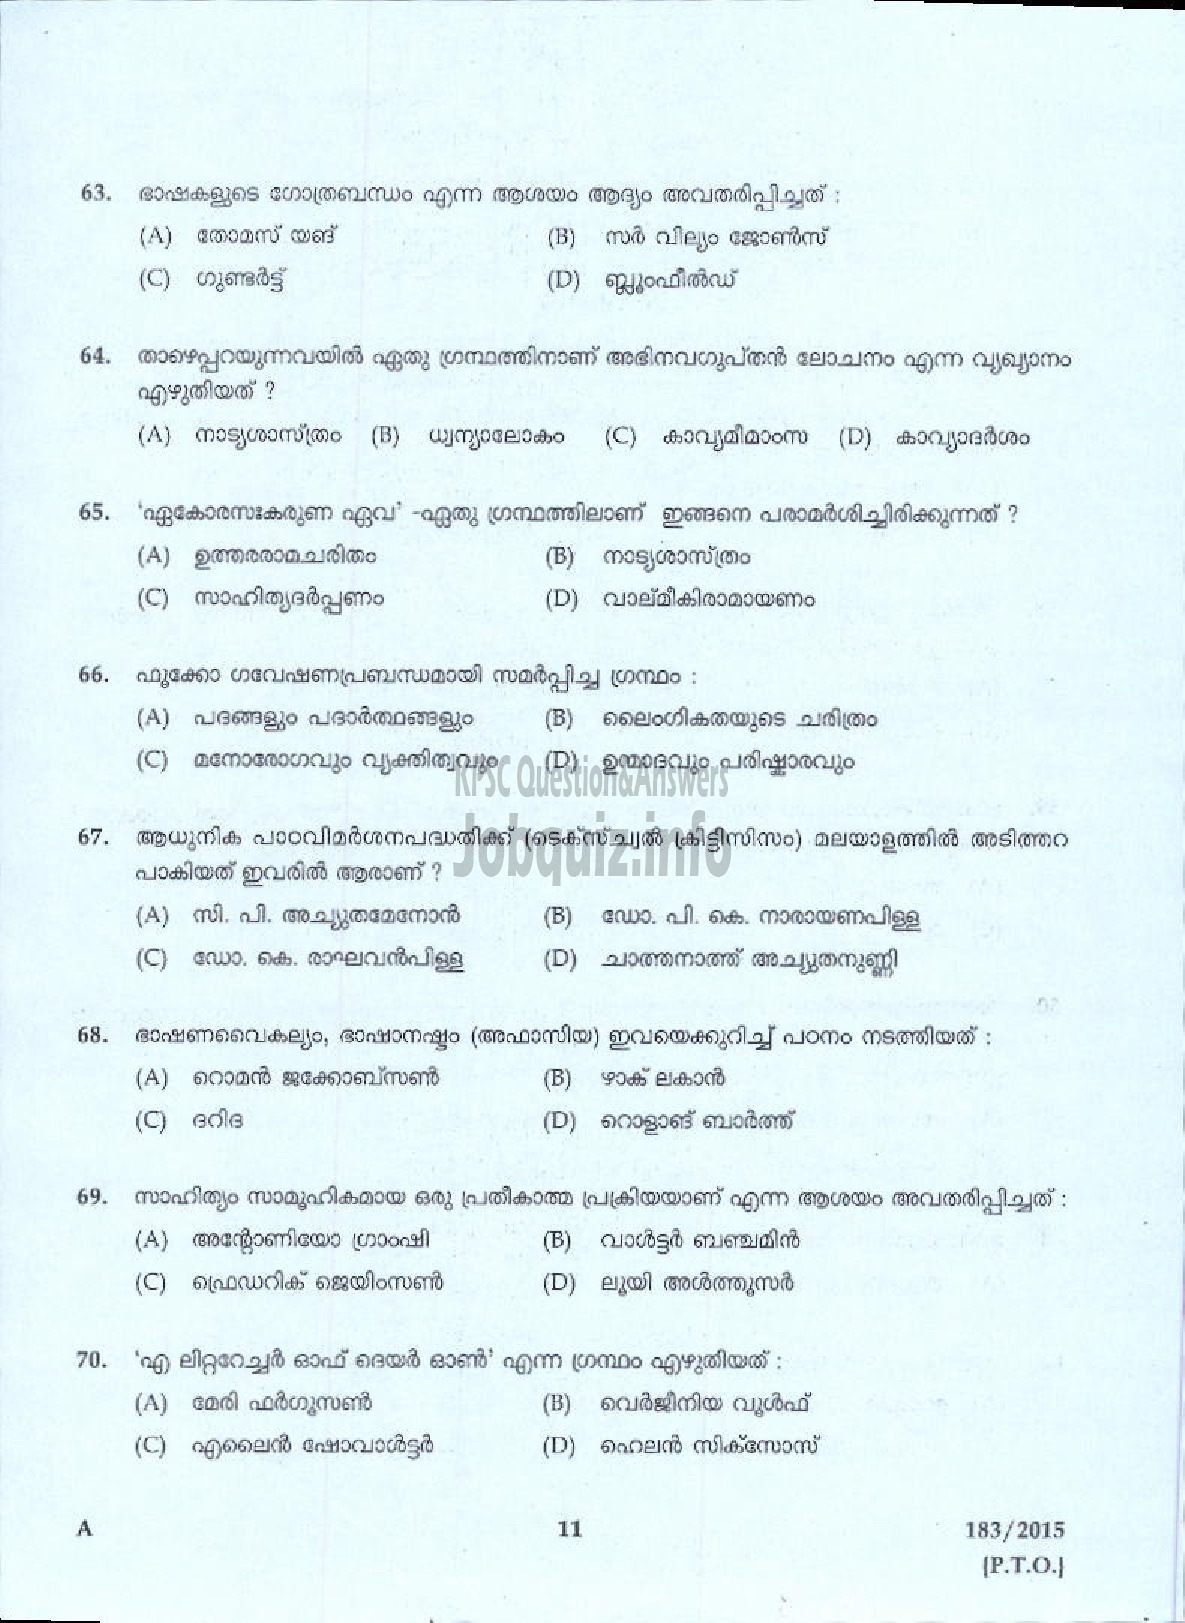 Kerala PSC Question Paper - LECTURER IN MALAYALAM COLLEGIATE EDUCATION-9